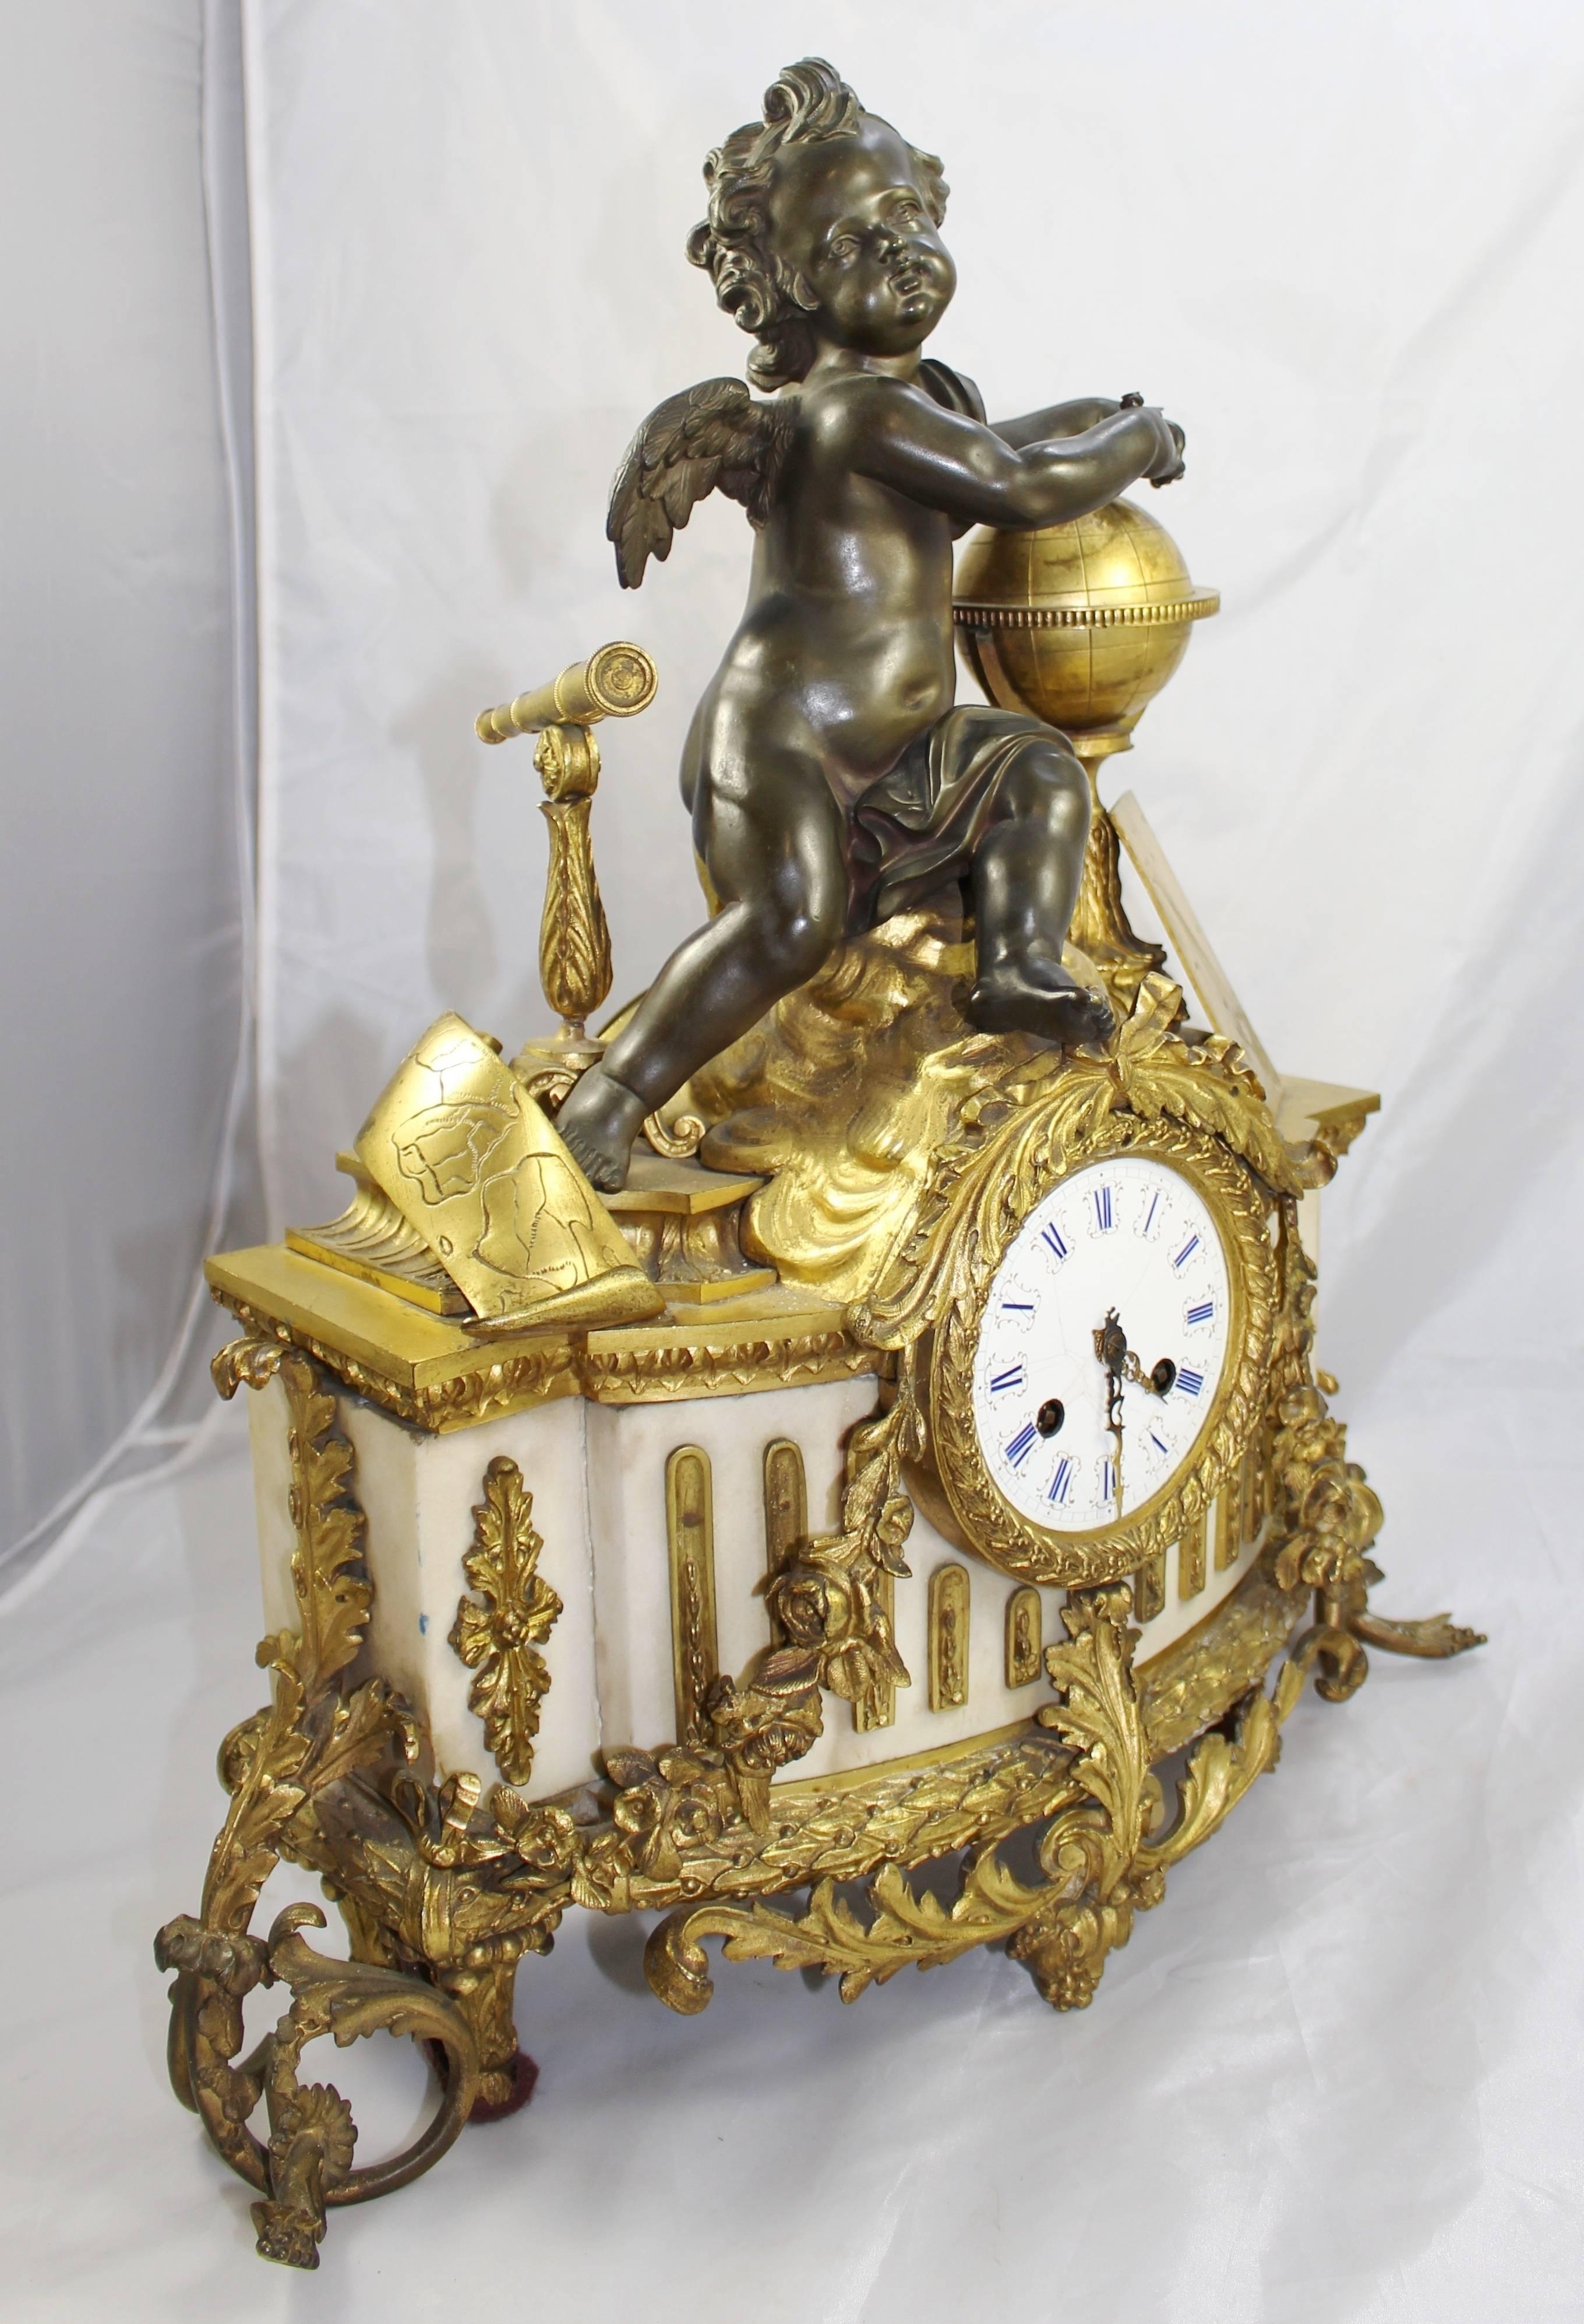 Period 
19th century.

Dial 
enamel dial with Roman numerals, brass hands, two winding holes, brassouter ring

Decoration 
marble body with bronze putti atop, brass globe and telescope. Heavy ornate ormolu mounts to the body, ormolu